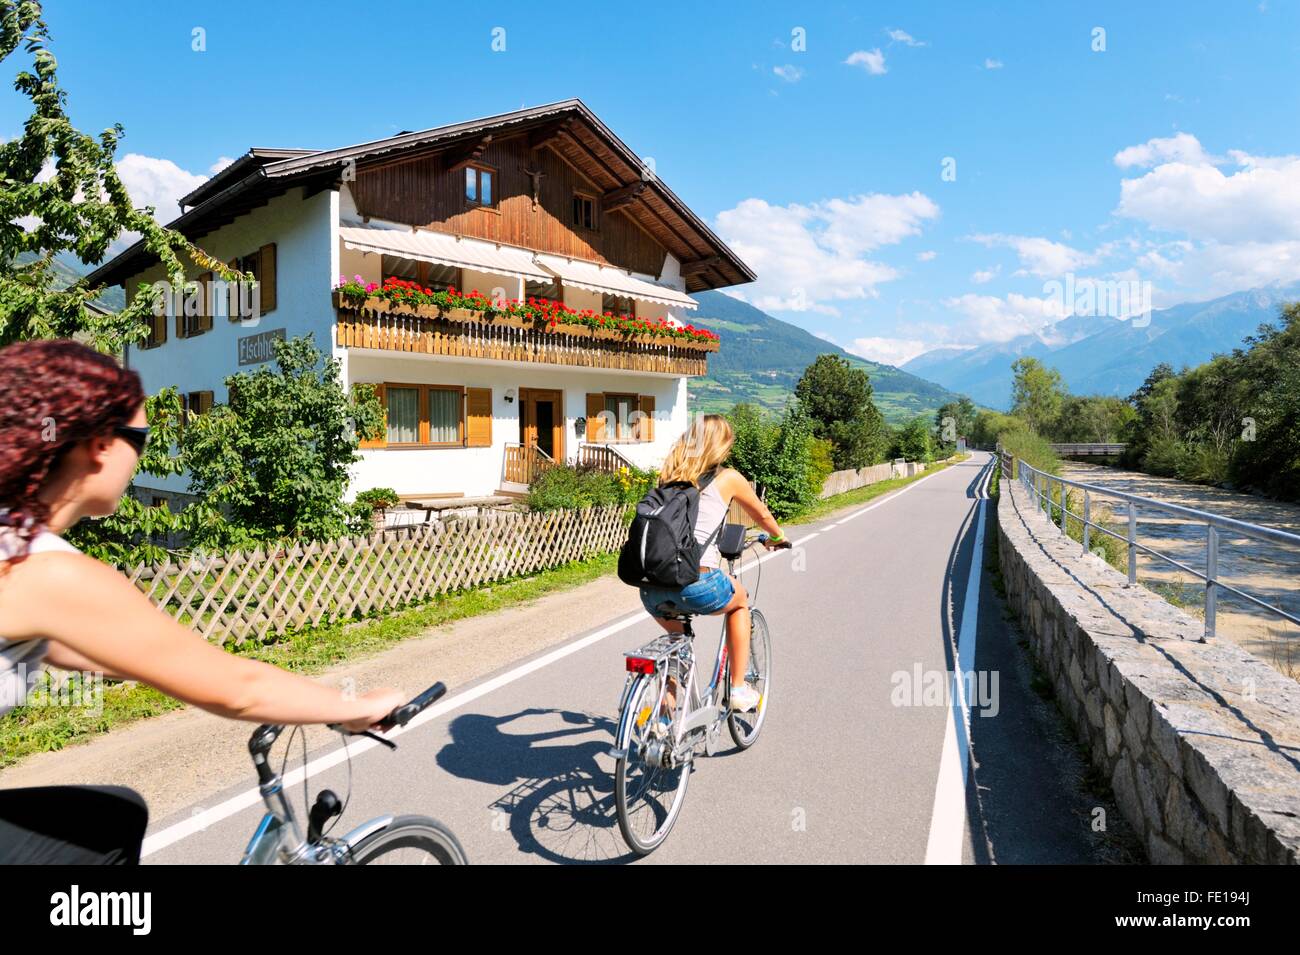 Cyclists leave the mediaeval walled town of Glurns in the Alto Adige region of Italy. Riverside chalet on the Via Lungo Adige Stock Photo